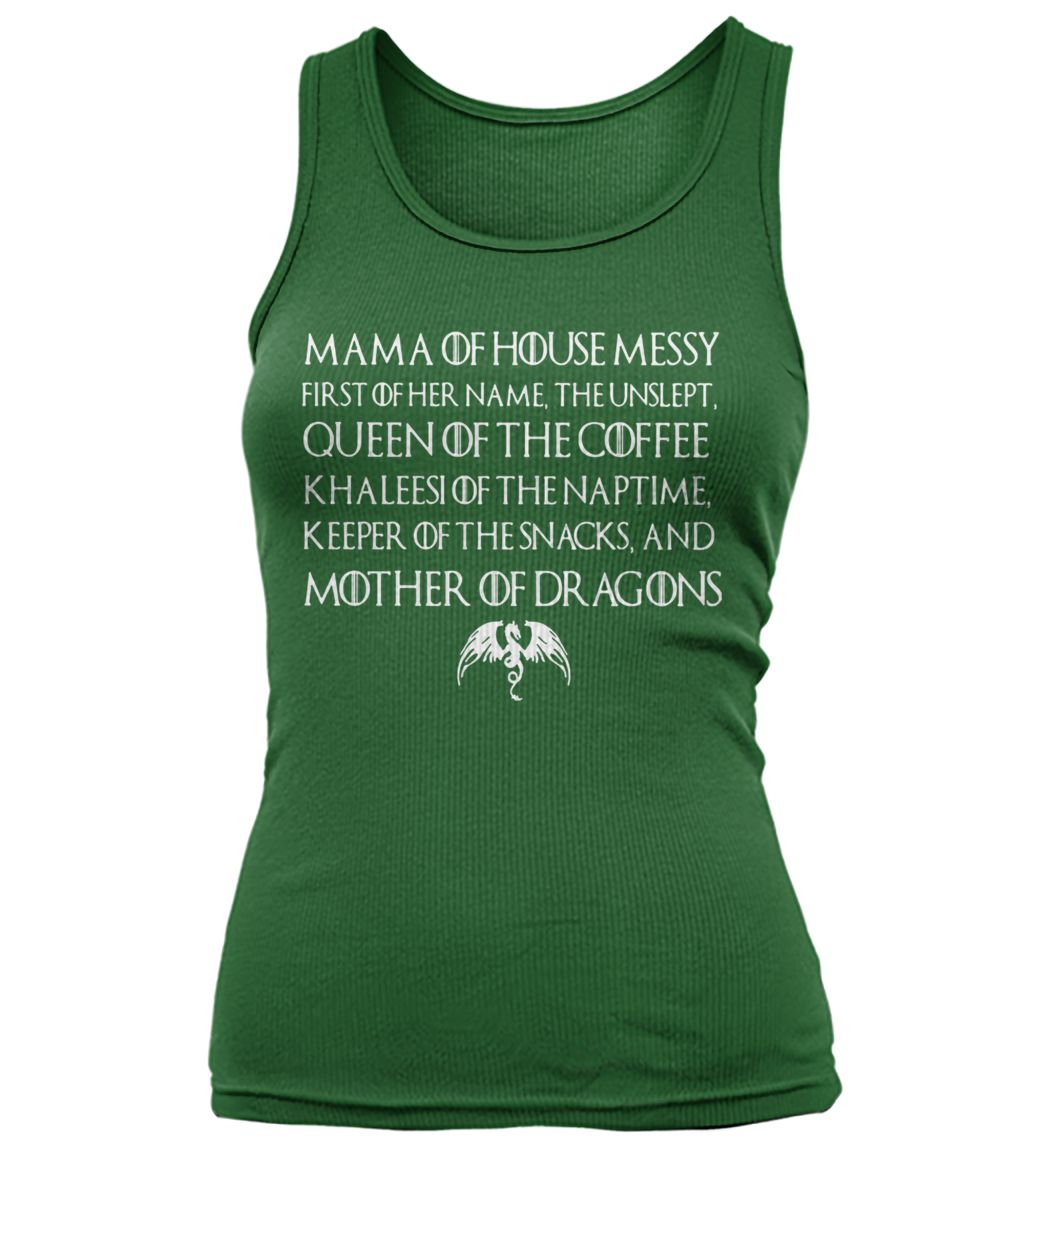 Game of thrones mama of house queen of the coffee khaleesi of the naptime mother of dragons women's tank top